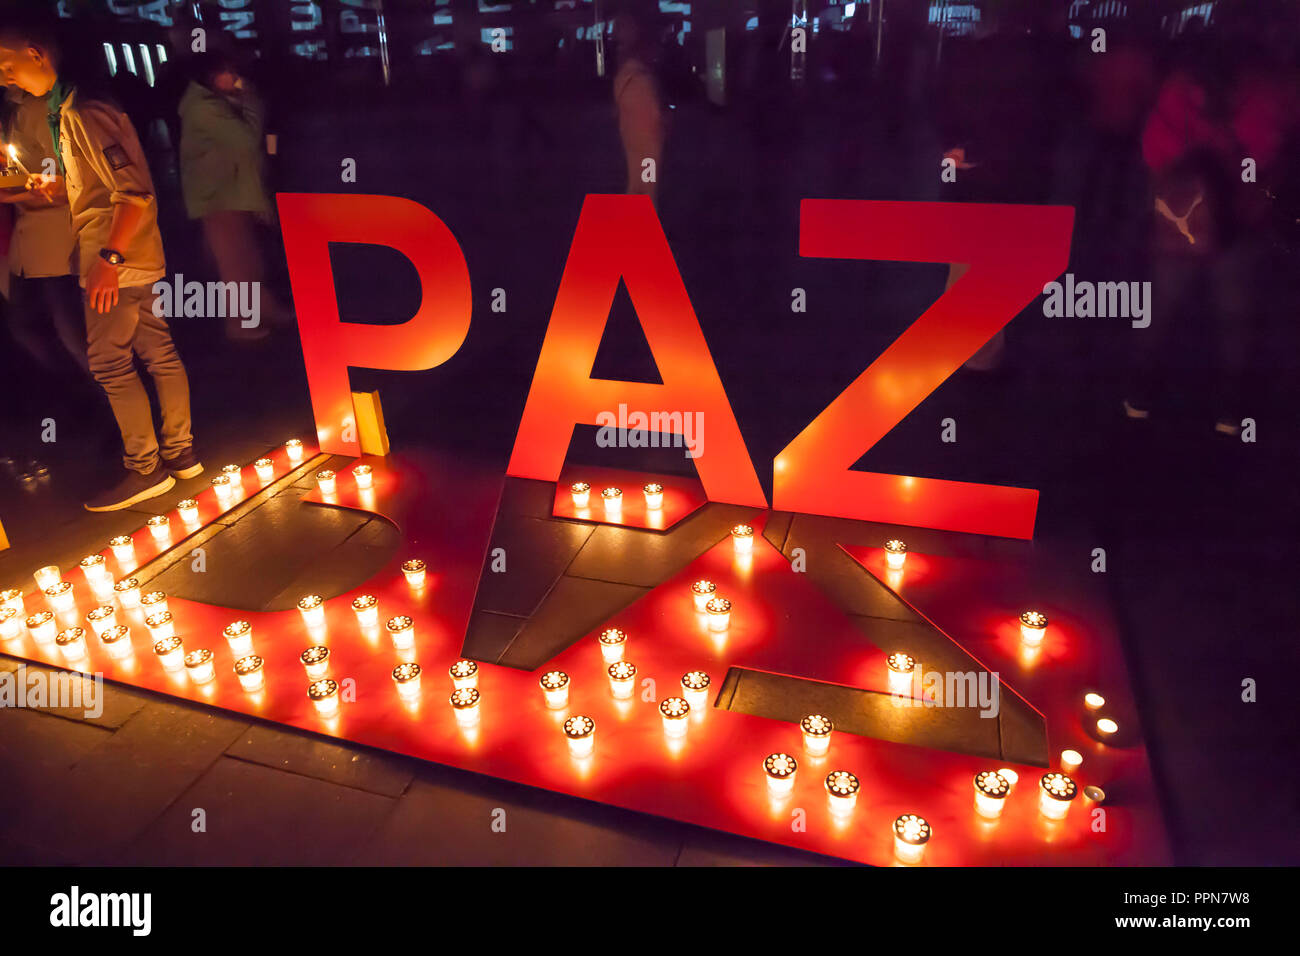 Cologne, Germany, September 26th. 2018. Peace lights in front of word sculptures in front of the cathedral during the cathedral pilgrimage 2018, the sculptures show the word peace in 12 languages, Cologne, Germany. Credit: Joern Sackermann/Alamy Live News Stock Photo